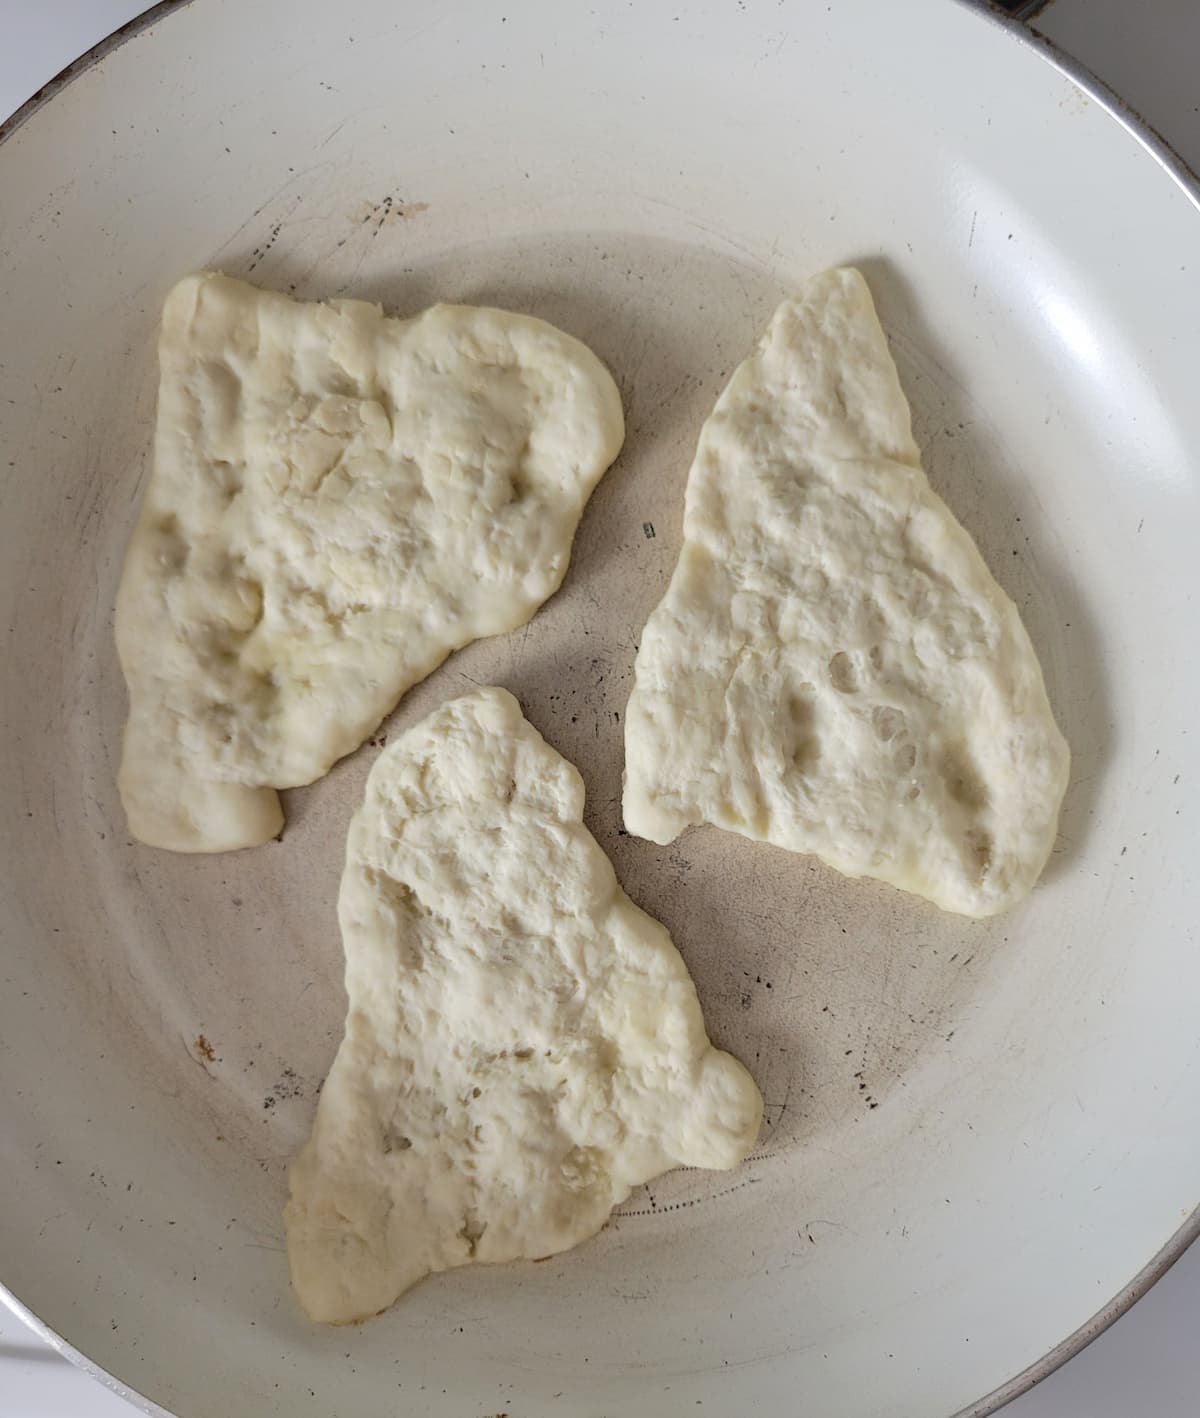 3 pieces of naan bread cooking in a skillet